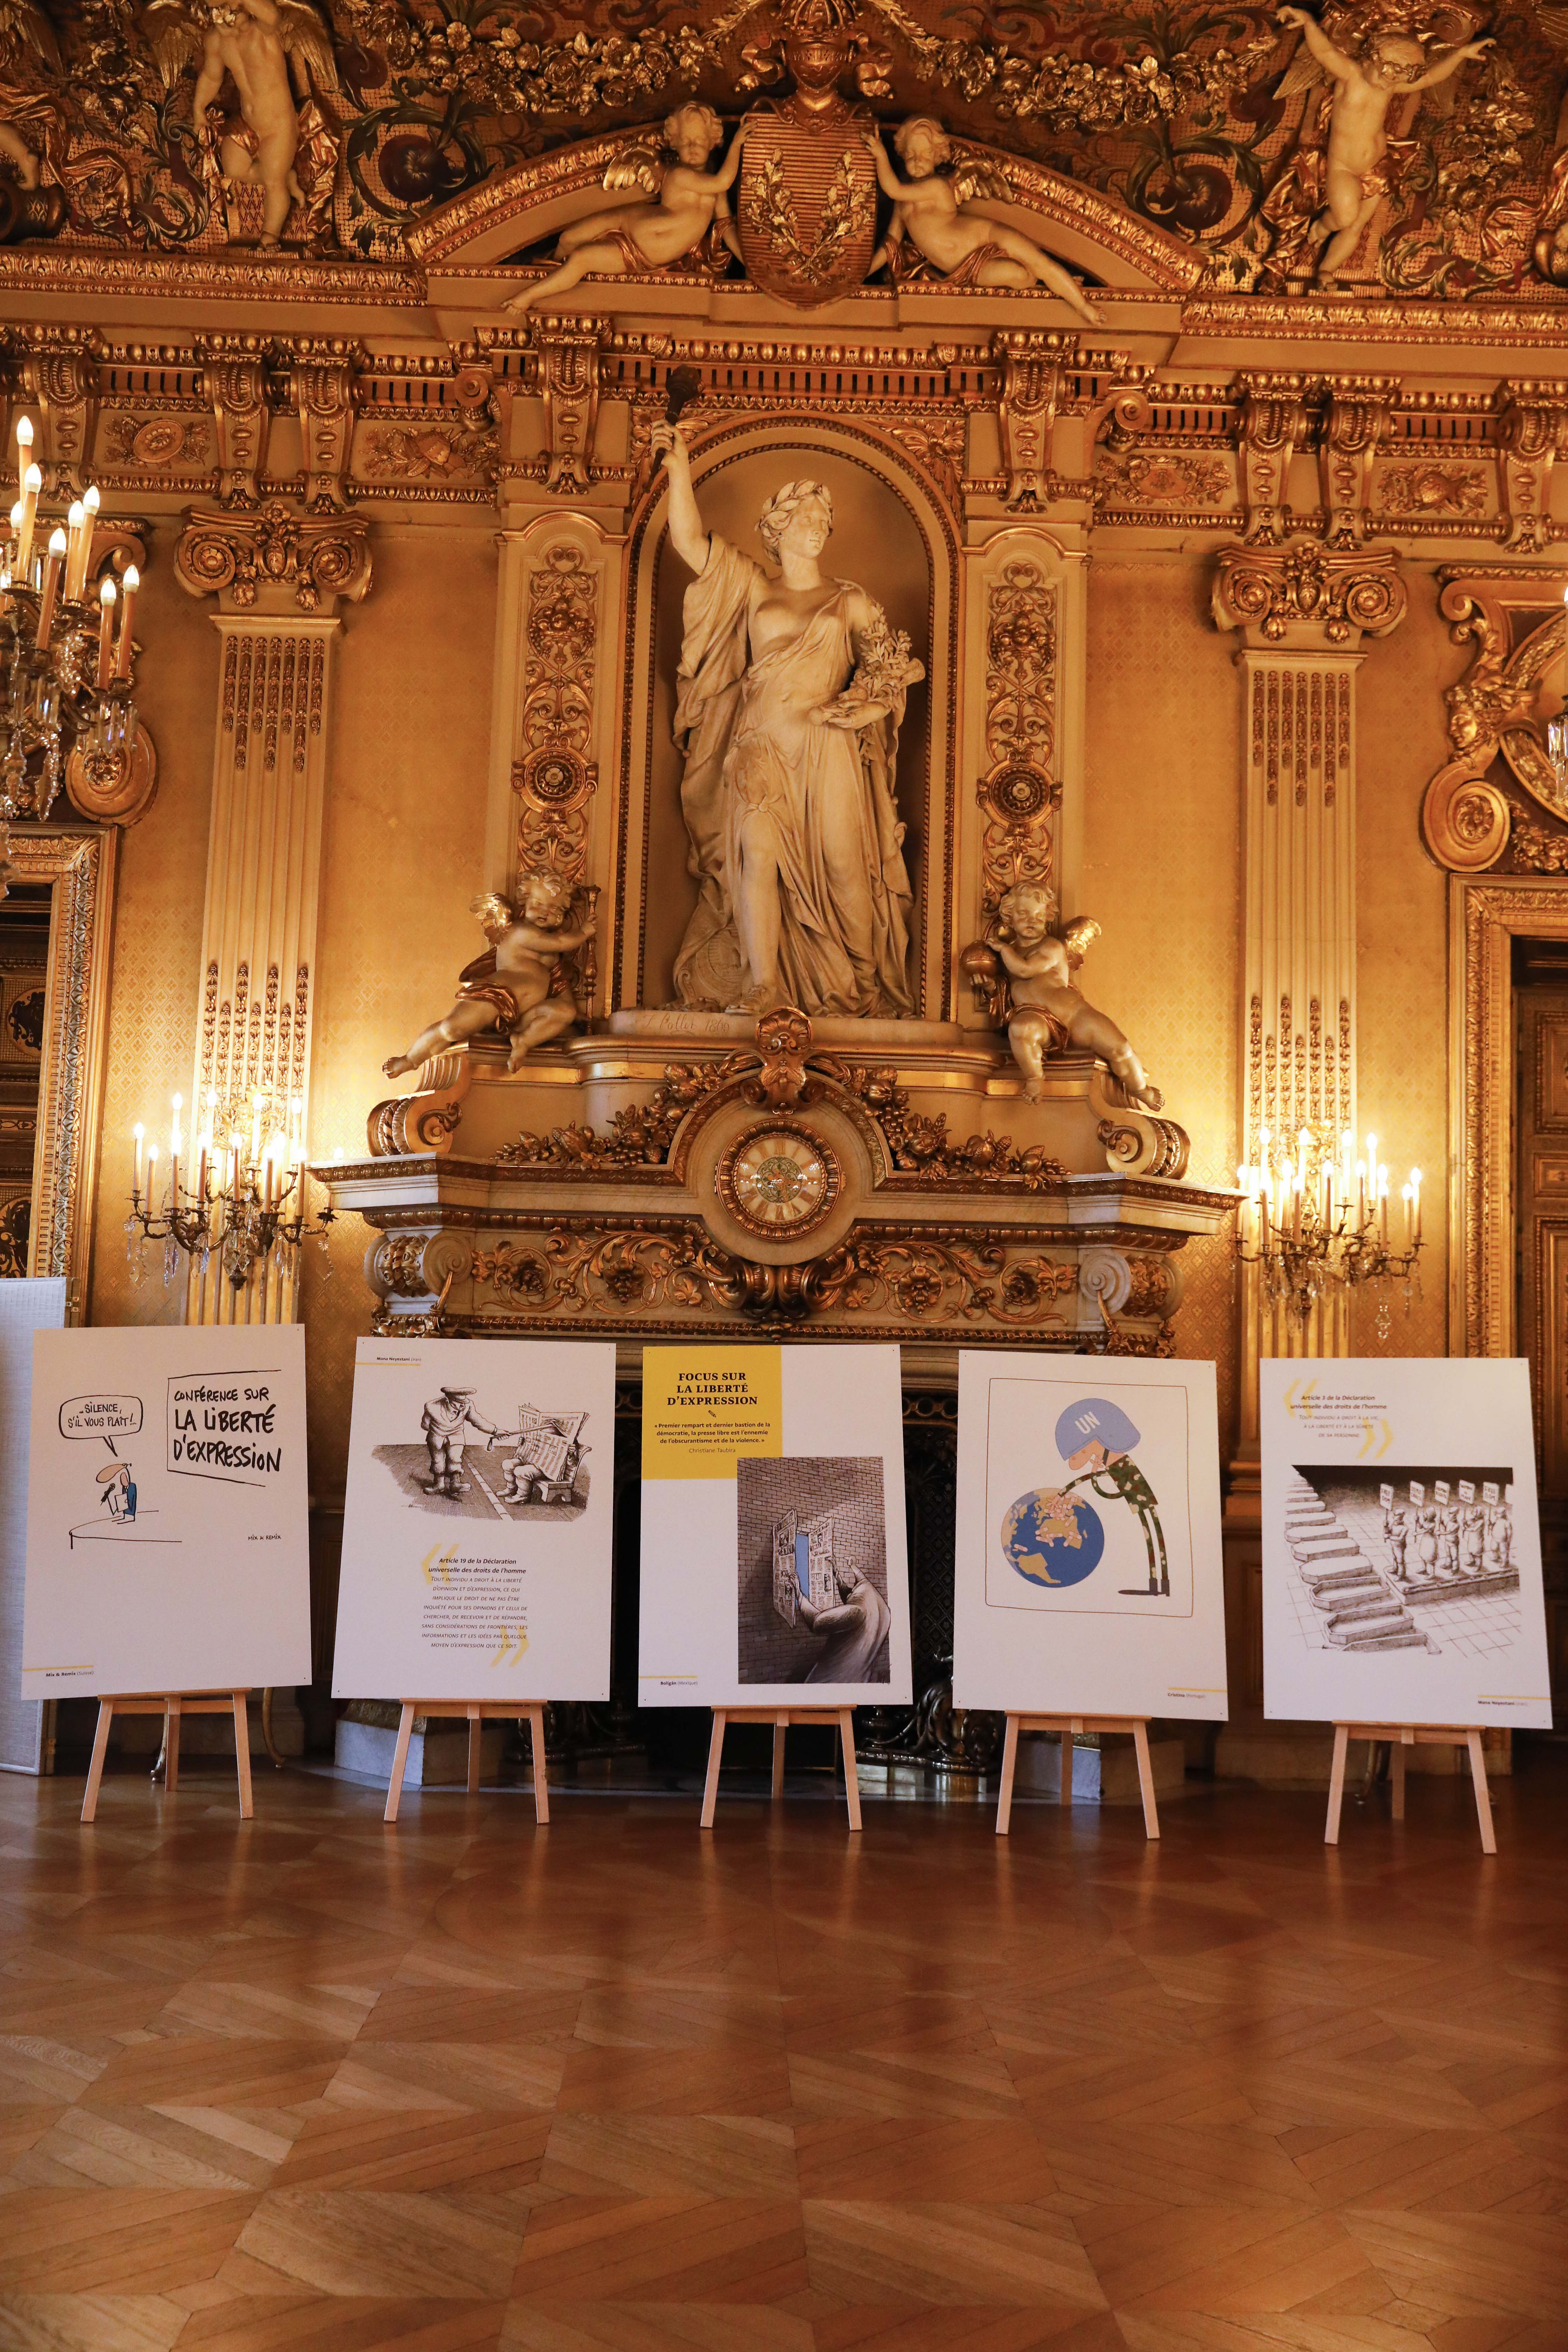 Preview of the exhibition “Human rights – still some way to go”, photo: Judith Litvine